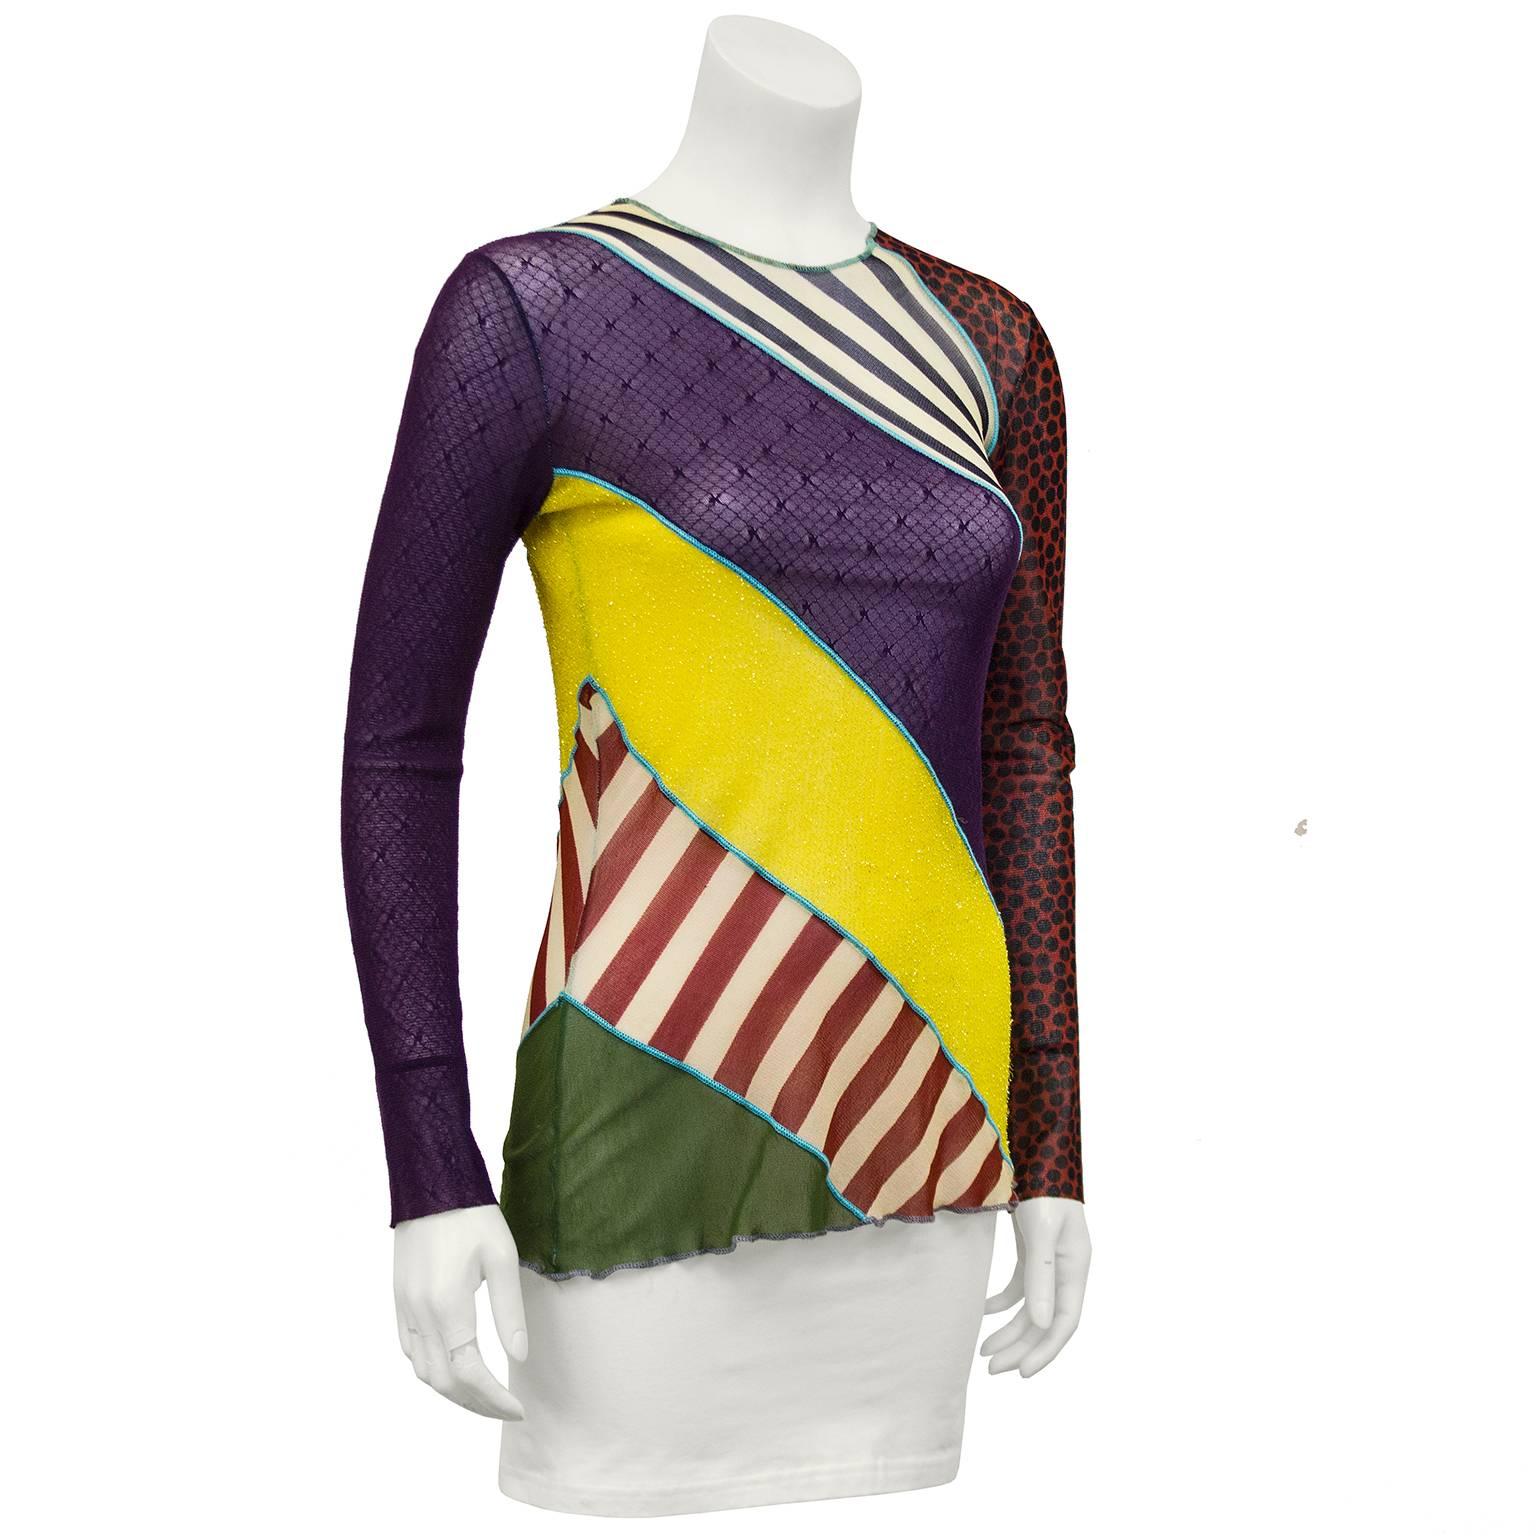 Jean Paul Gaultier long sleeve top from the early 2000s. Interesting mix of fabric, colour and patterns on a diagonal bias. Sheer. Excellent vintage condition. Fits like a US 4 - some give, fabric is elasticized. 

Sleeve 22